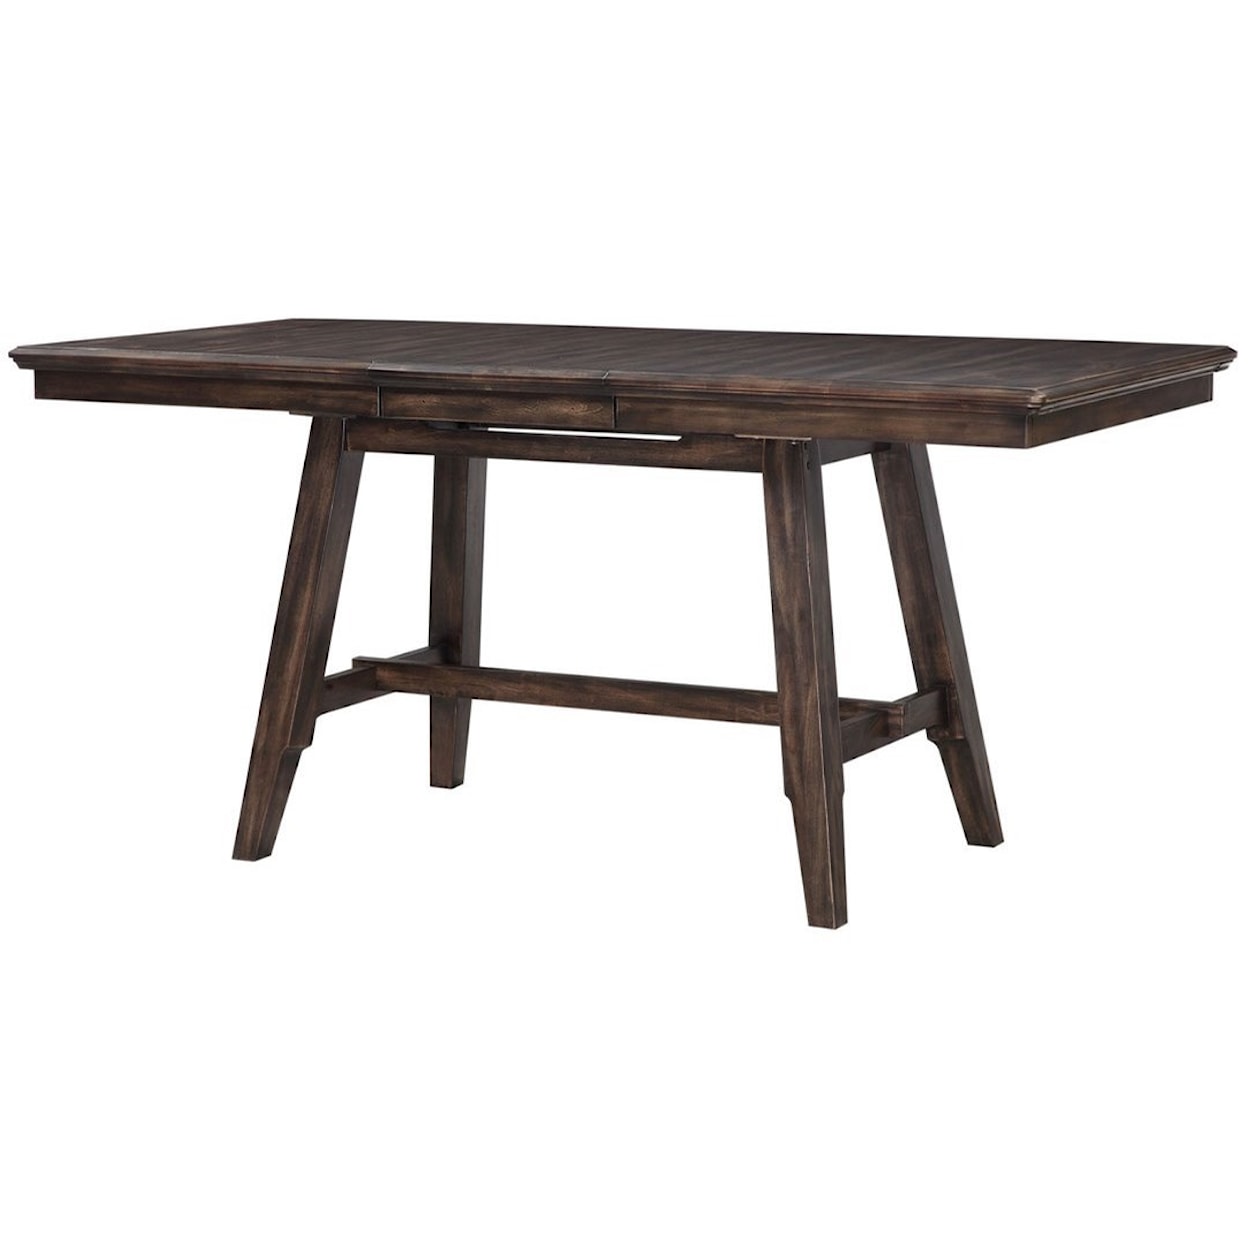 Winners Only Daphne 78" Counter Height Table with Leaf